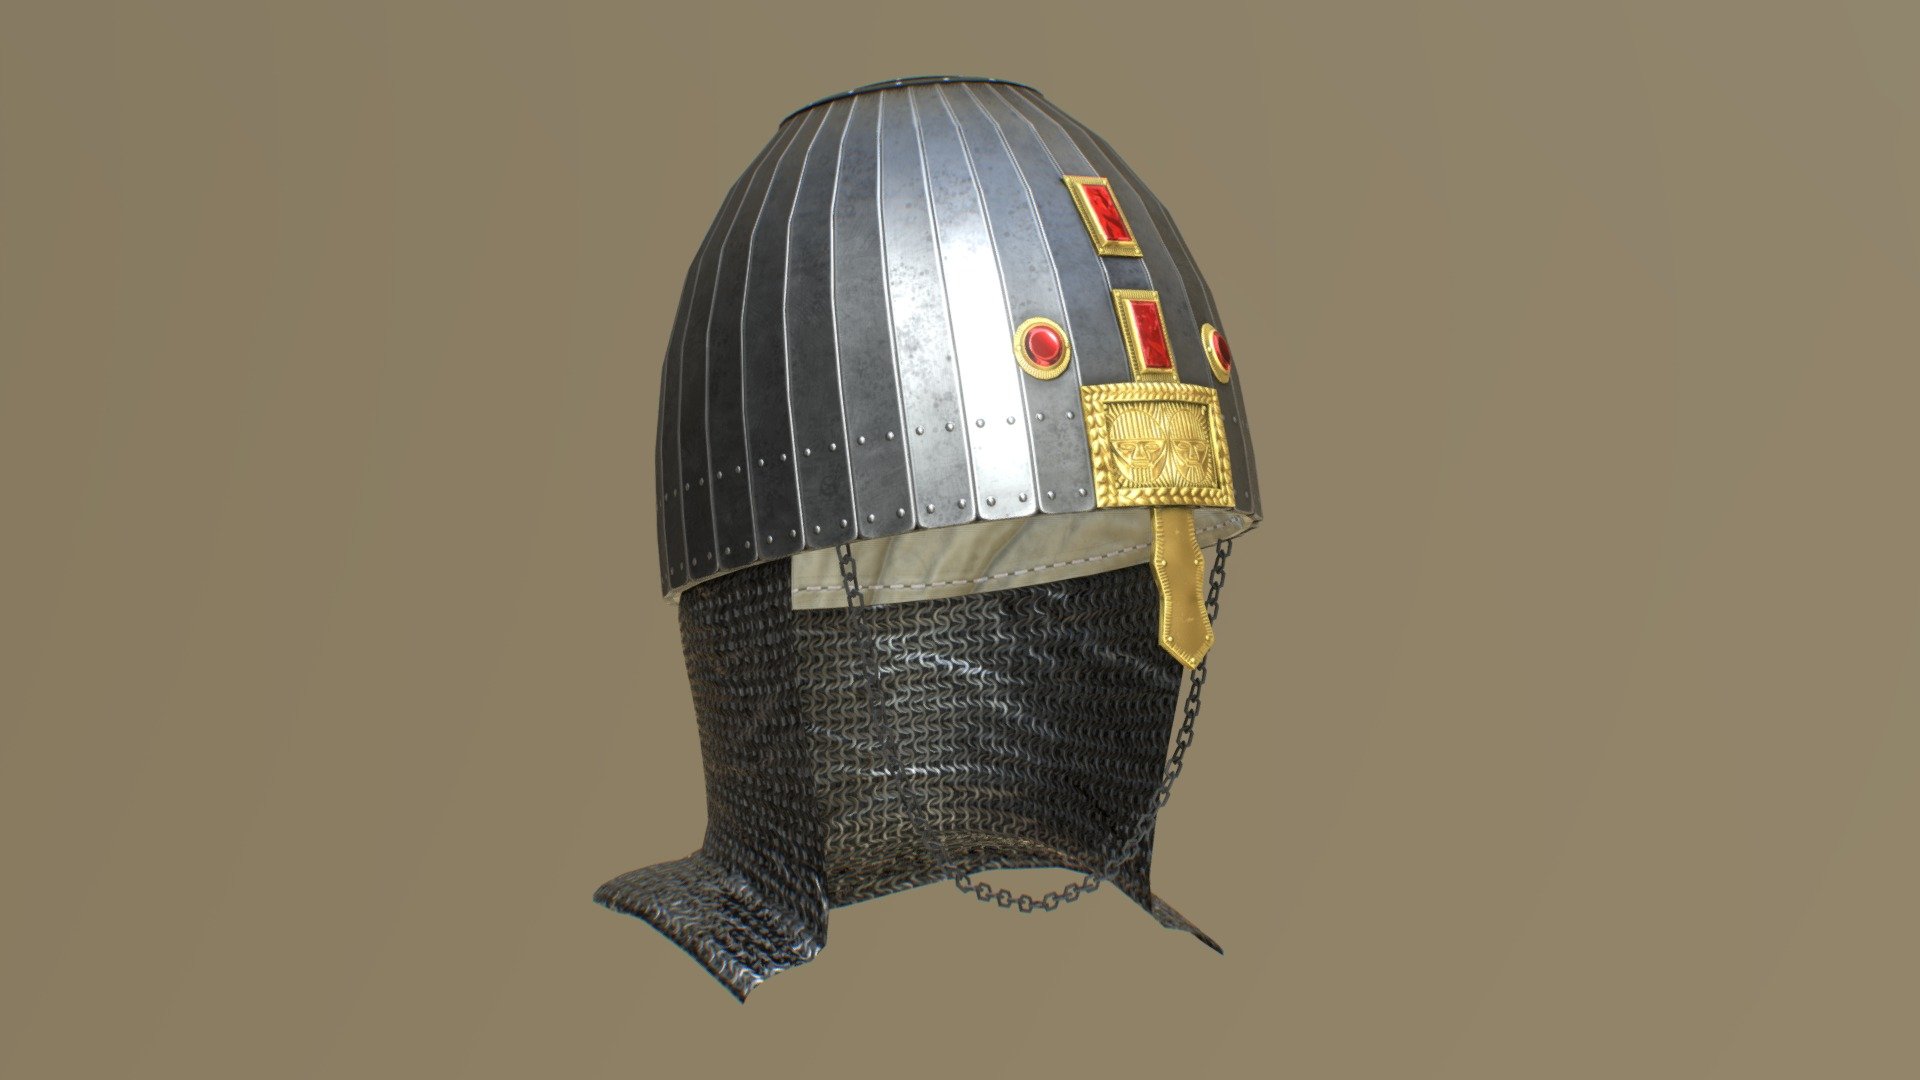 The helmet was found in a burial in barrow N# 13 of the third barrow group south of the village of Kishpek, Kabardino-Balkaria. The design of the helmet and its time frame suggest that it belonged to the Huns.

Source: https://late-roman.ru/arheologicheskiy-katalog/shlemy-i-maski-lamellyarnyy-lamellenhelme-i-analog/shlem-iz-kishpek/ - Kispek - Eastern Helmet - Buy Royalty Free 3D model by Davicolt 3d model